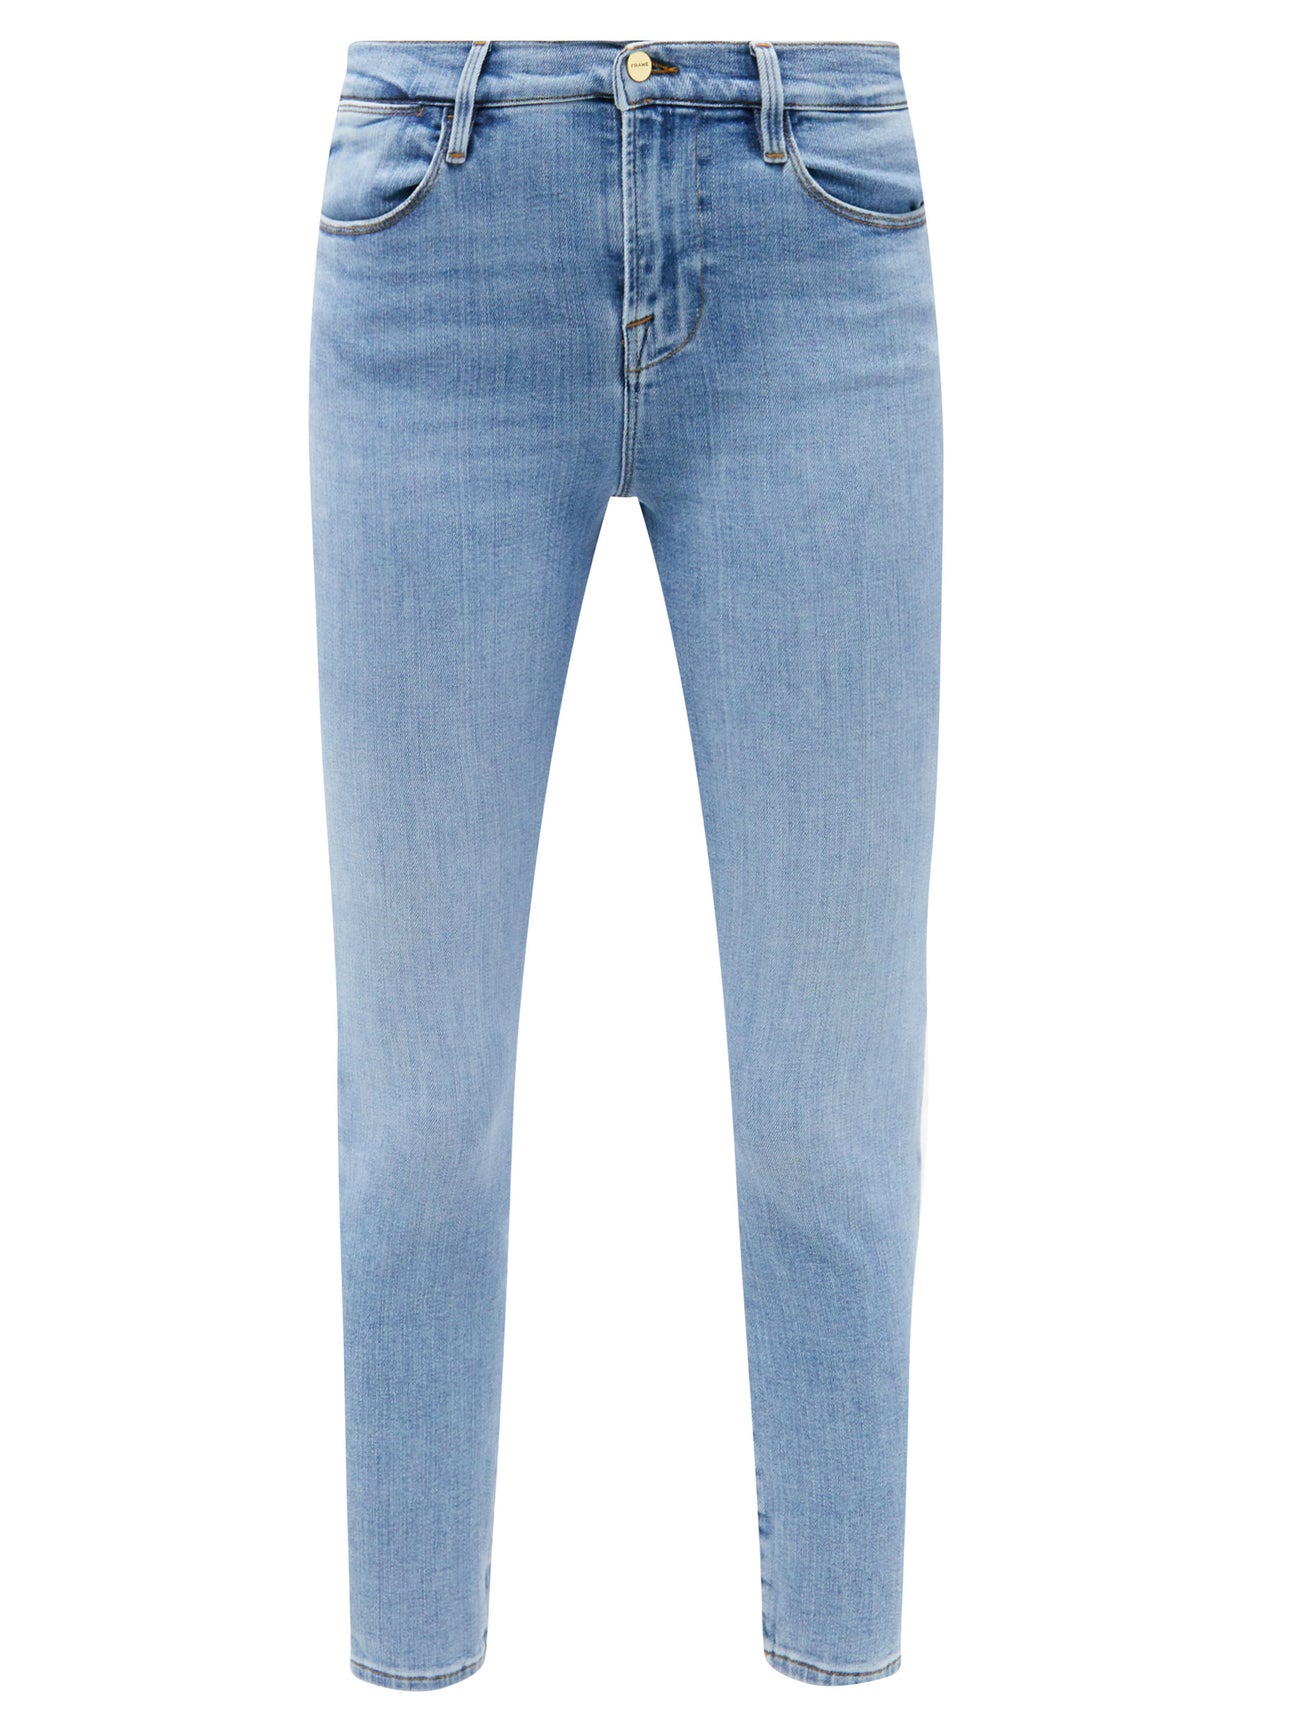 The Best Skinny Jeans for Every Issue With Fit | Who What Wear UK